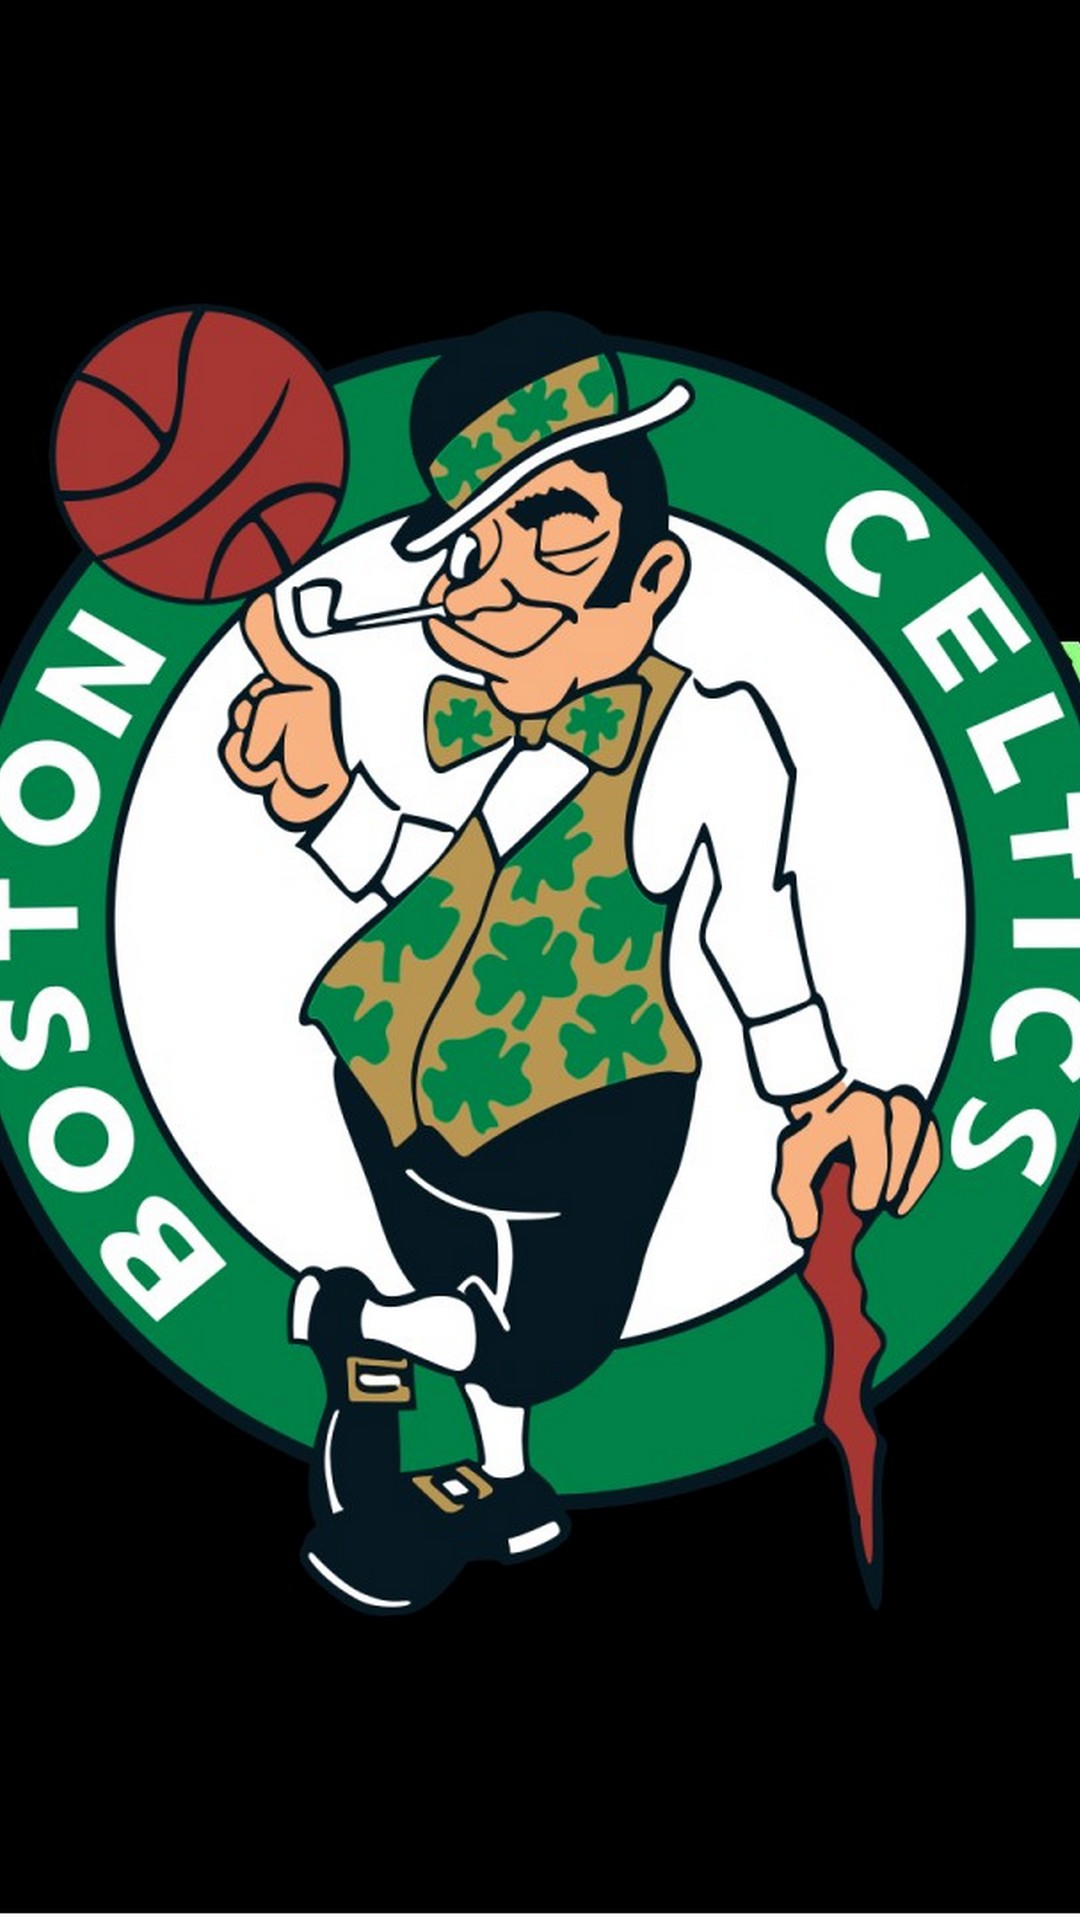 Wallpapers Phone Boston Celtics with image resolution 1080x1920 pixel. You can make this wallpaper for your Android backgrounds, Tablet, Smartphones Screensavers and Mobile Phone Lock Screen